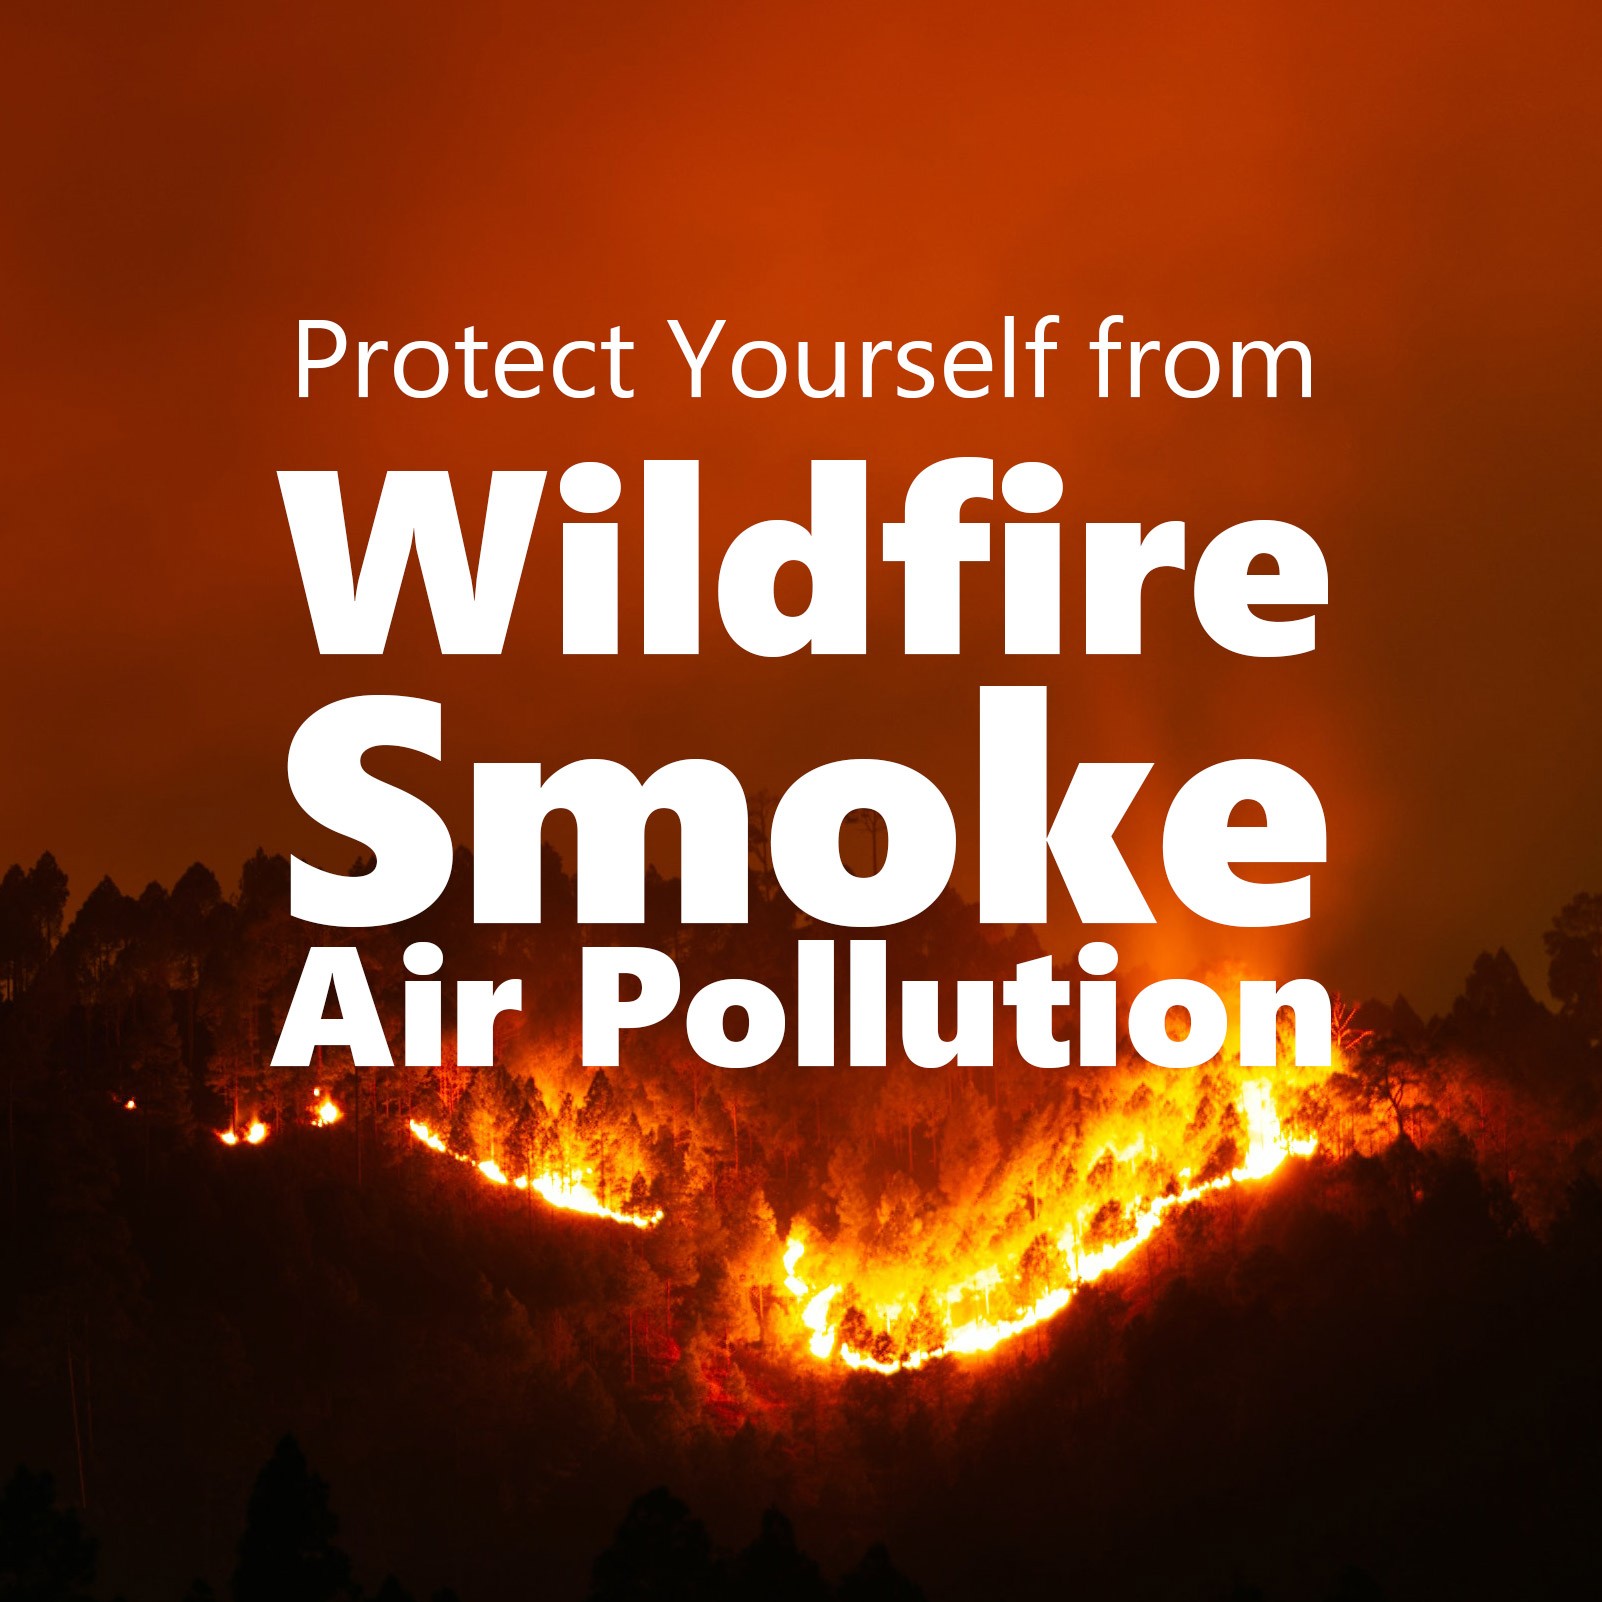 Protect Yourself from Wildfire Smoke Air Pollution, Wildfires Smog, Hazardous Air Quality in Canada and the U.S. smog, humo, haze in united states U. S. US NYC New York Canada  - ionkini air purifier